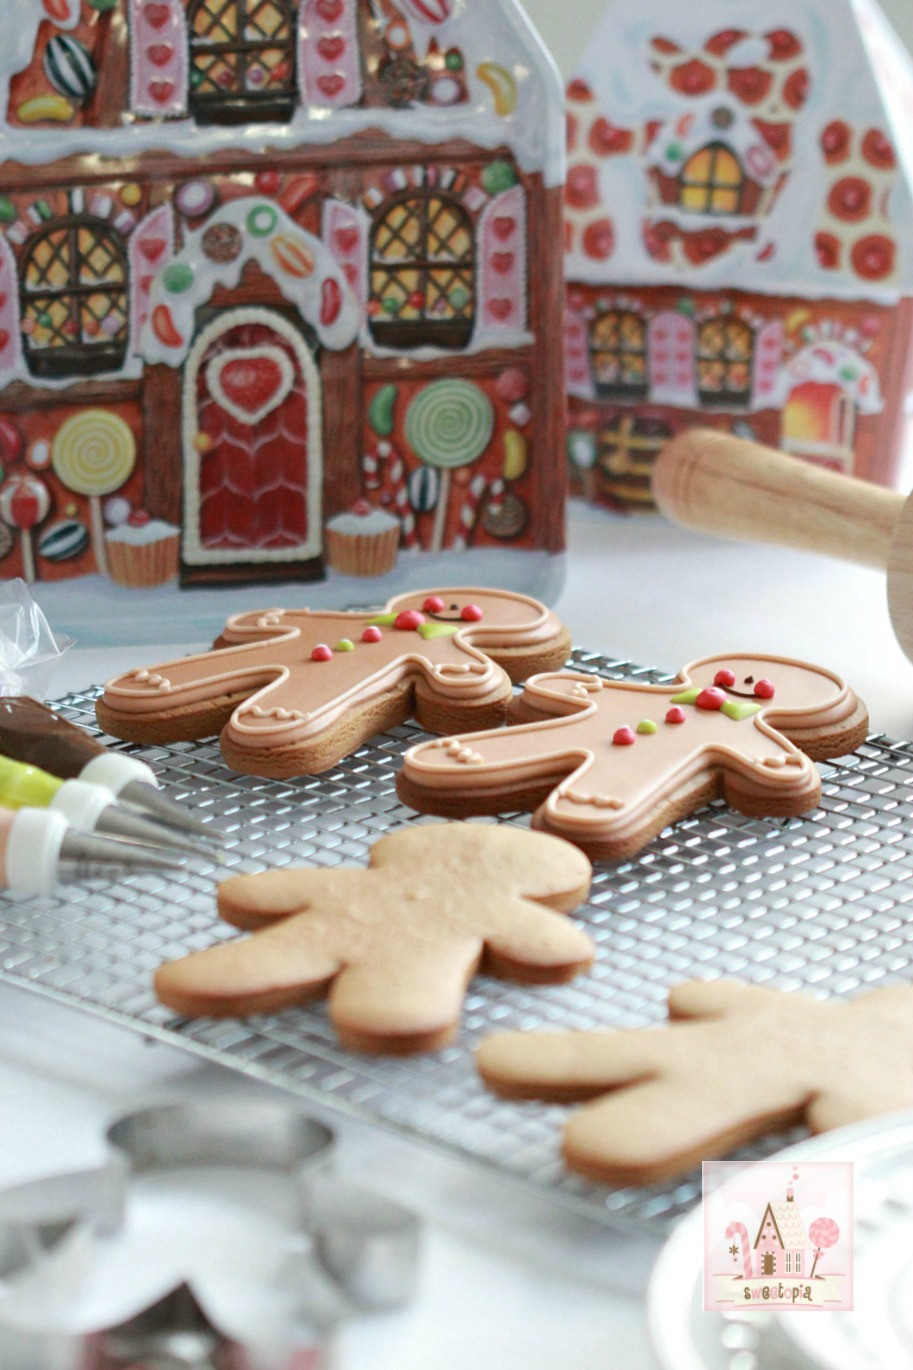 Decorating Gingerbread Cookies
 Video & Recipe How to Make Gingerbread Cut Out Cookies